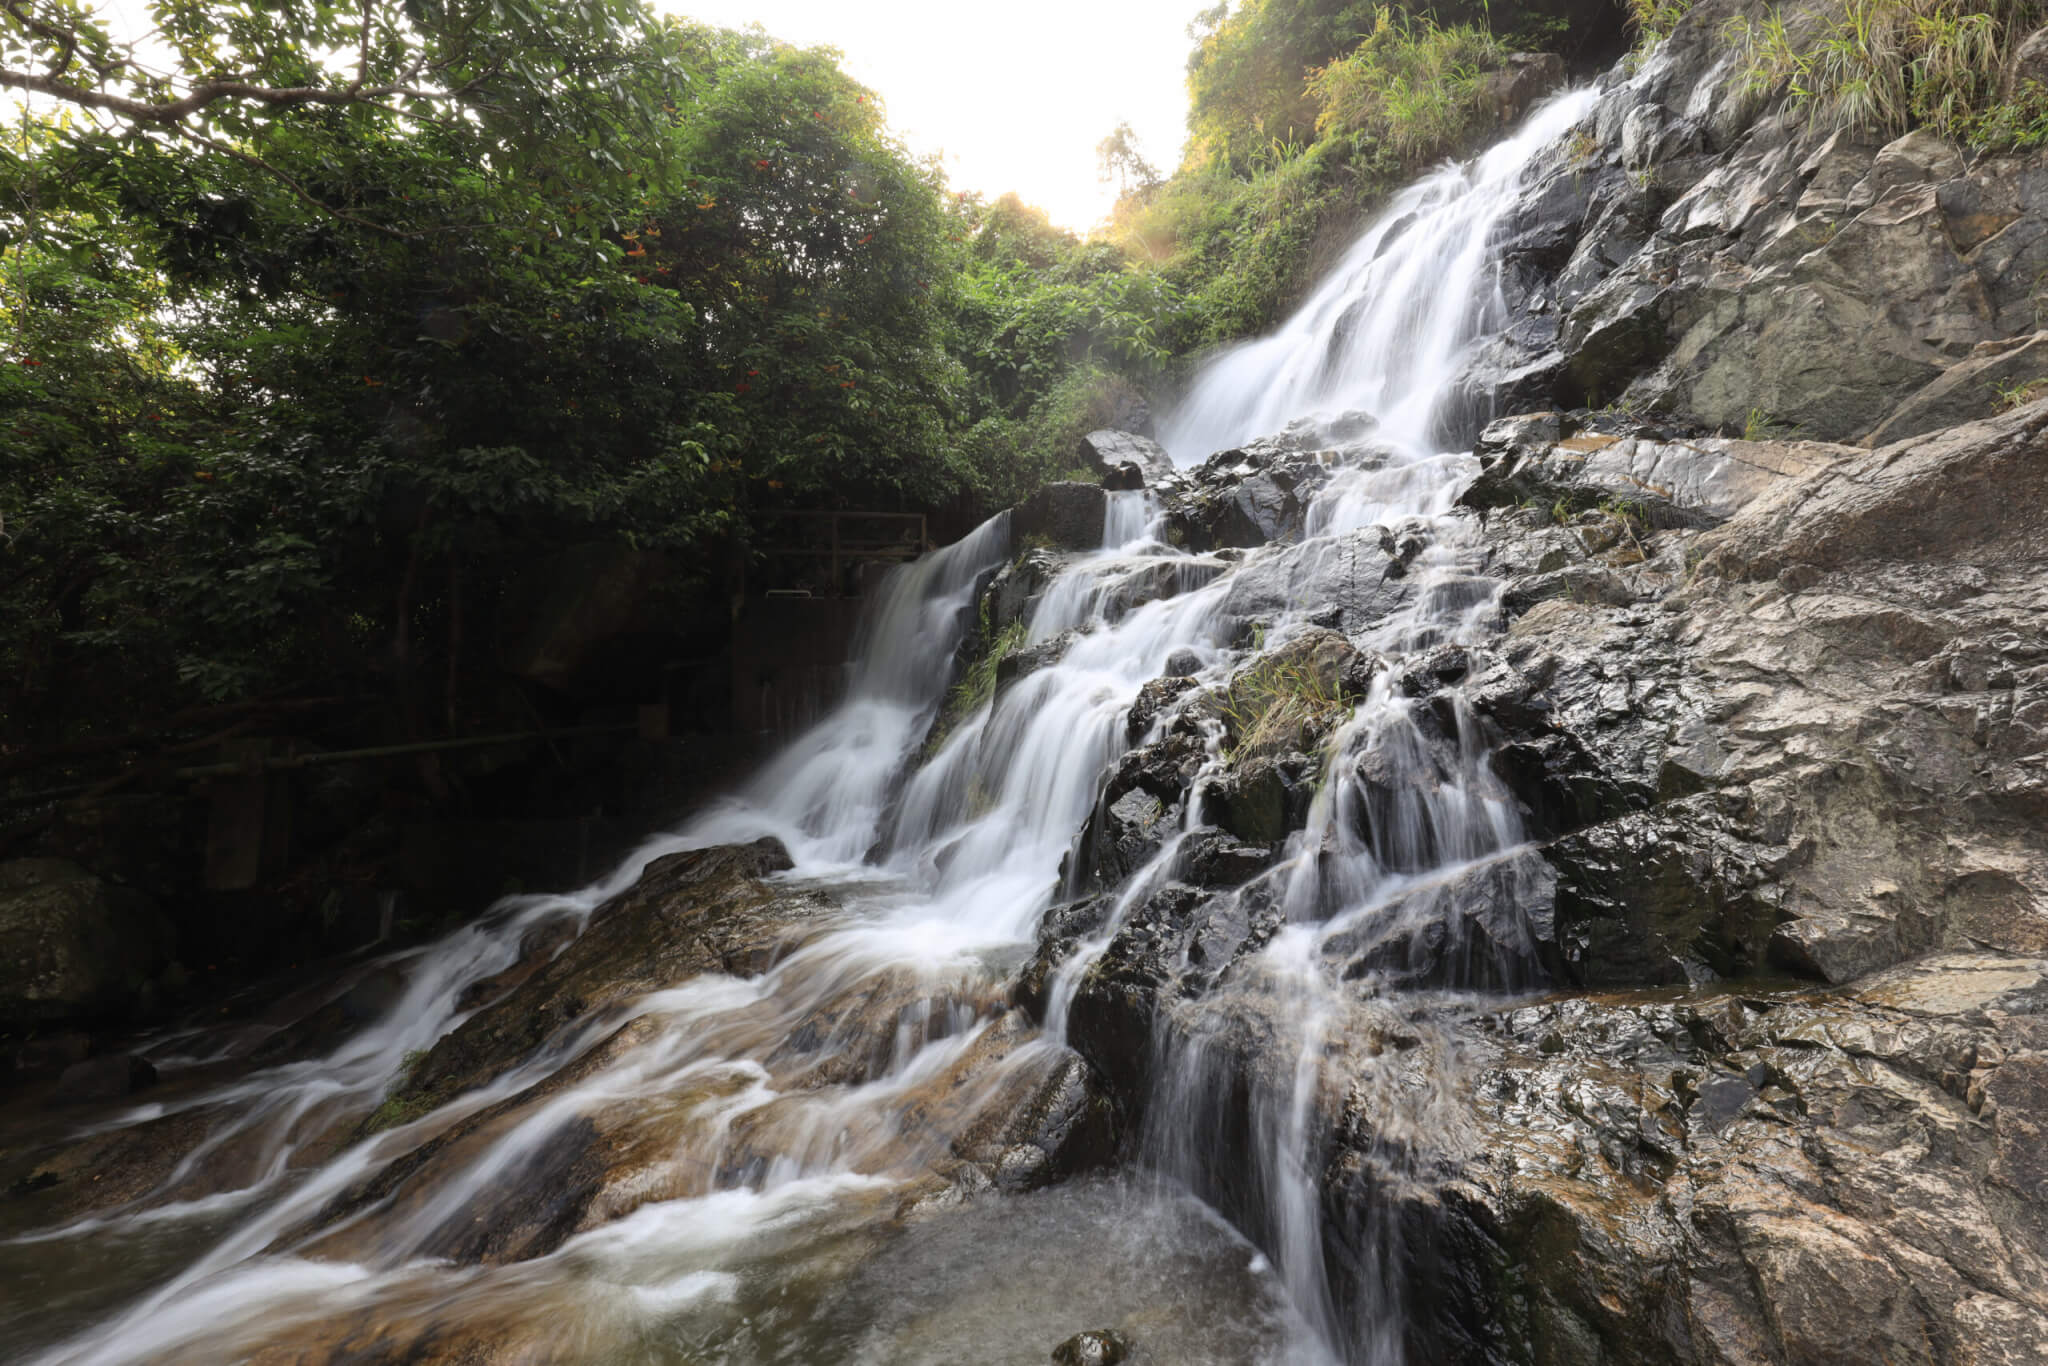 water flow at the main fall of the Silvermine Waterfalls on the Lantau 23 July 2021